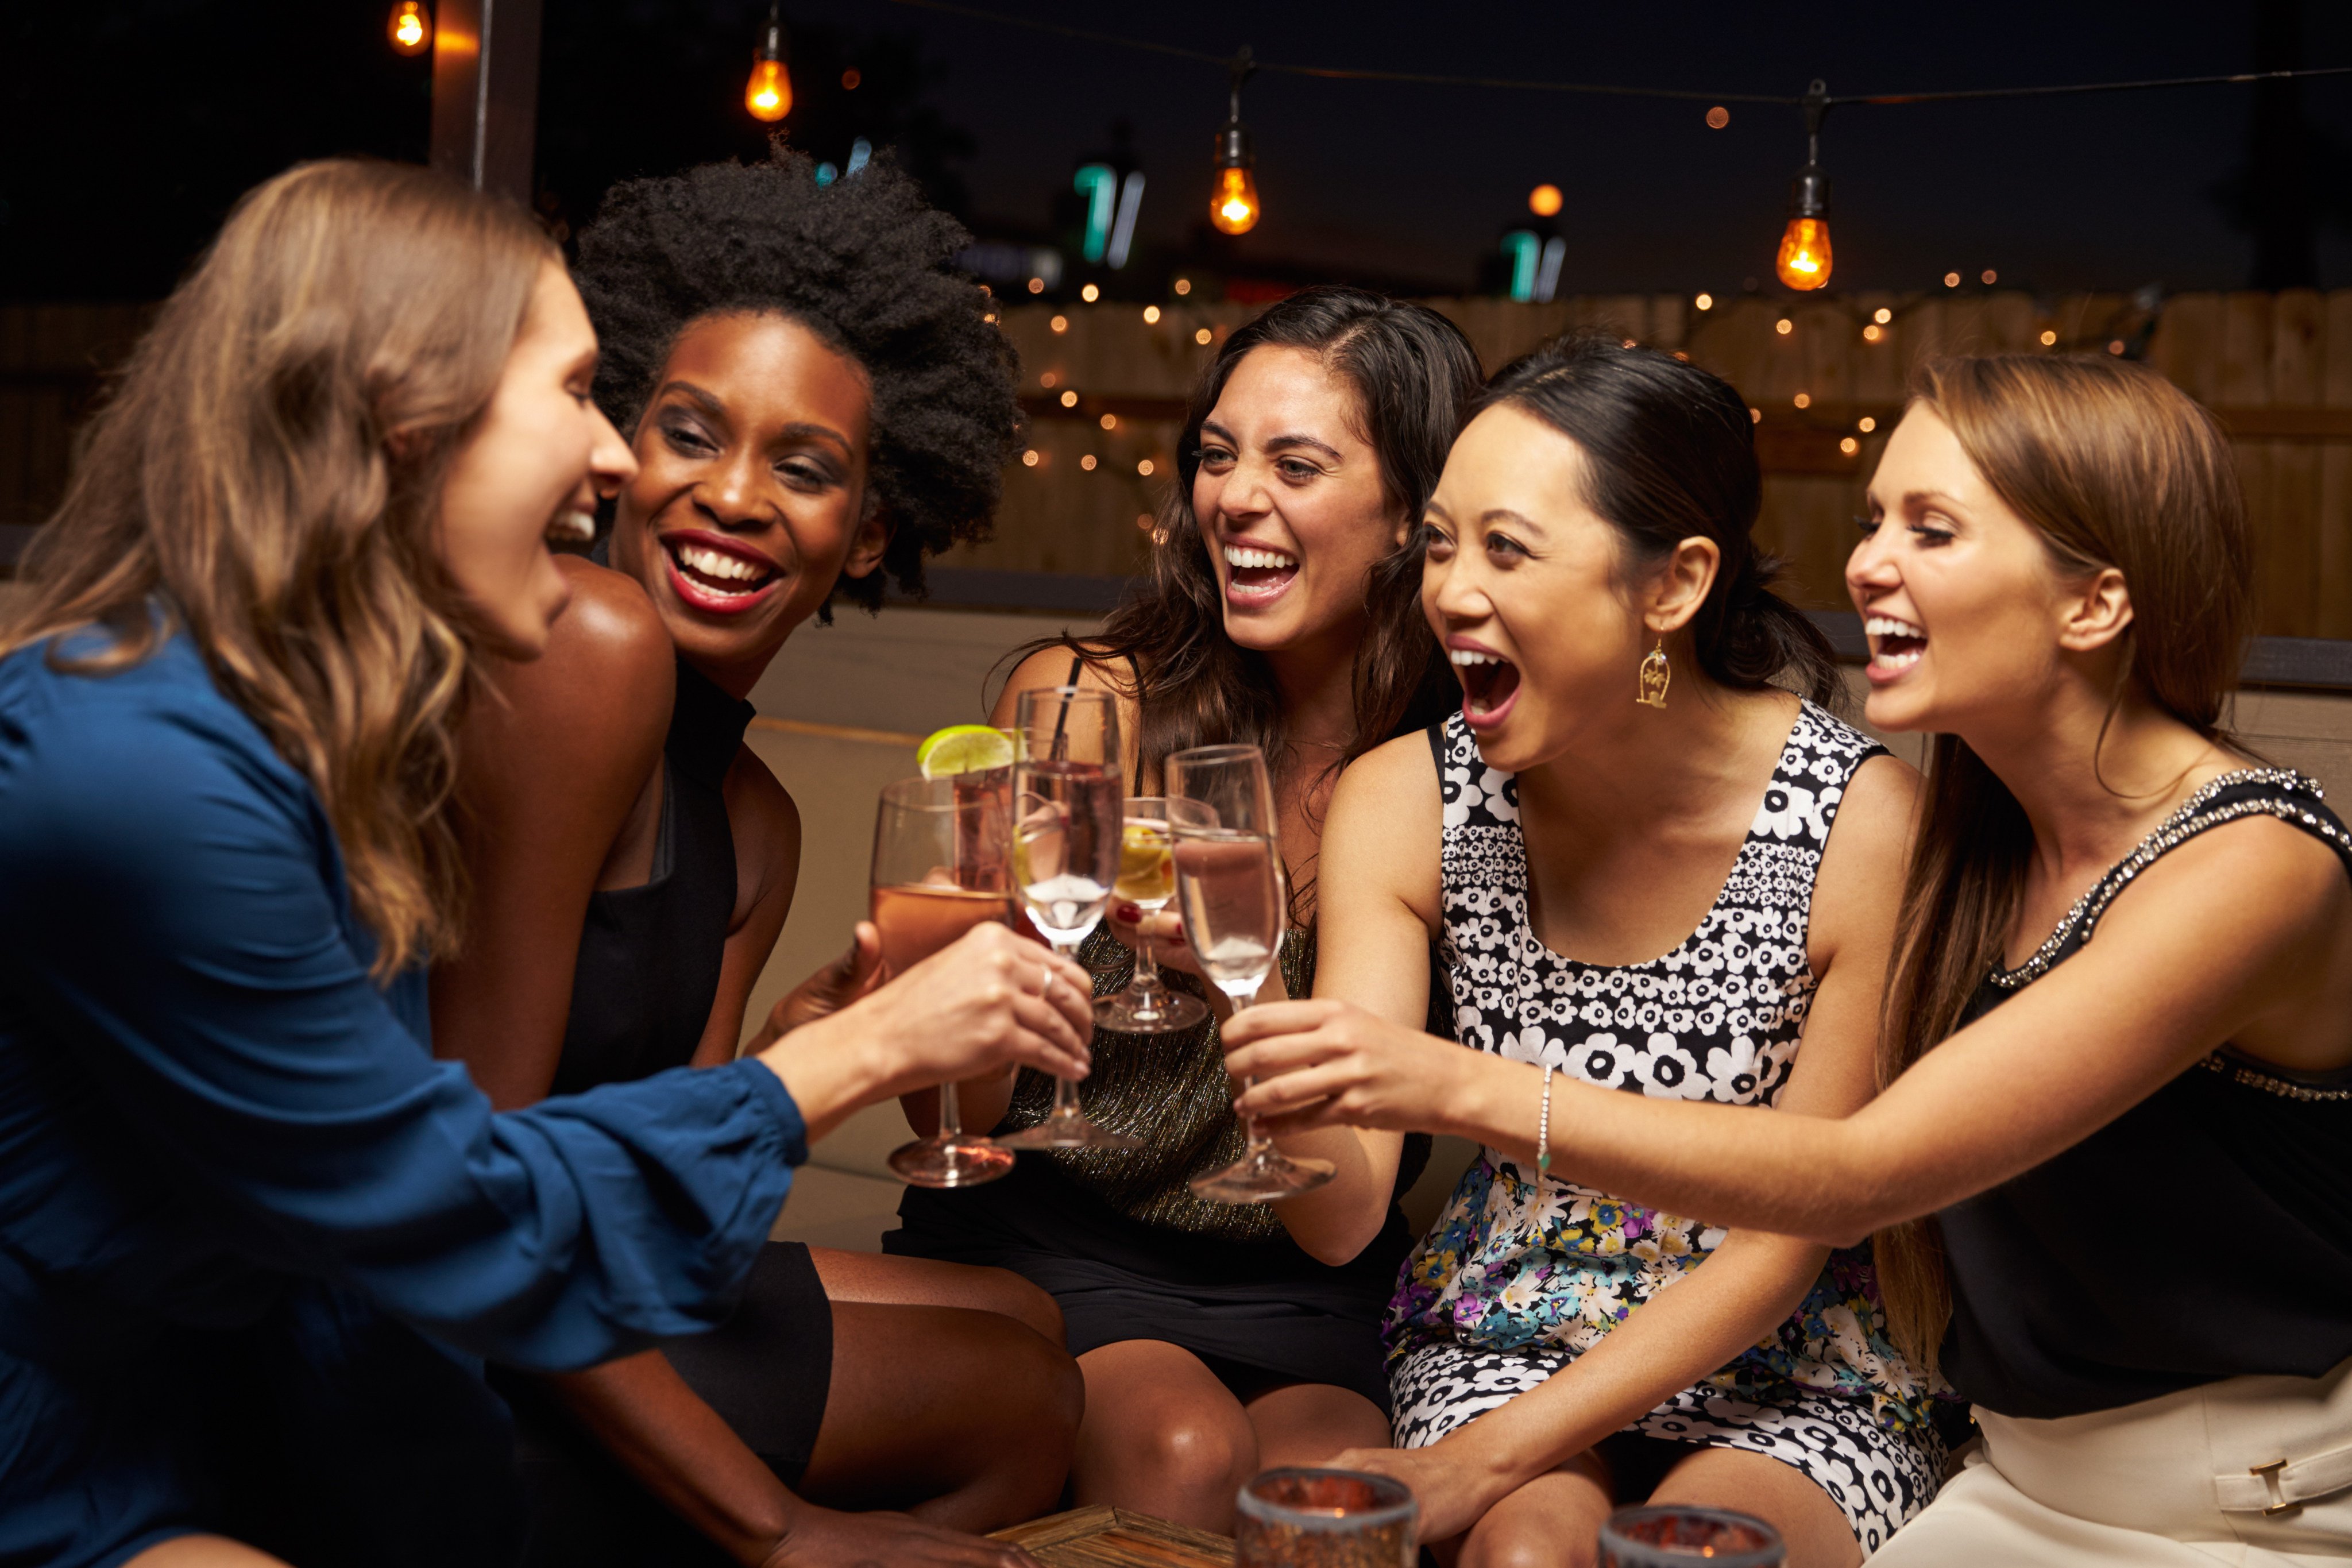 A group of women drinking. Sommelier Yulia Ezhikova shares five ways you can rethink your approach to alcohol and drinking, from no-alcohol days to keeping stress levels in check. Photo: Shutterstock